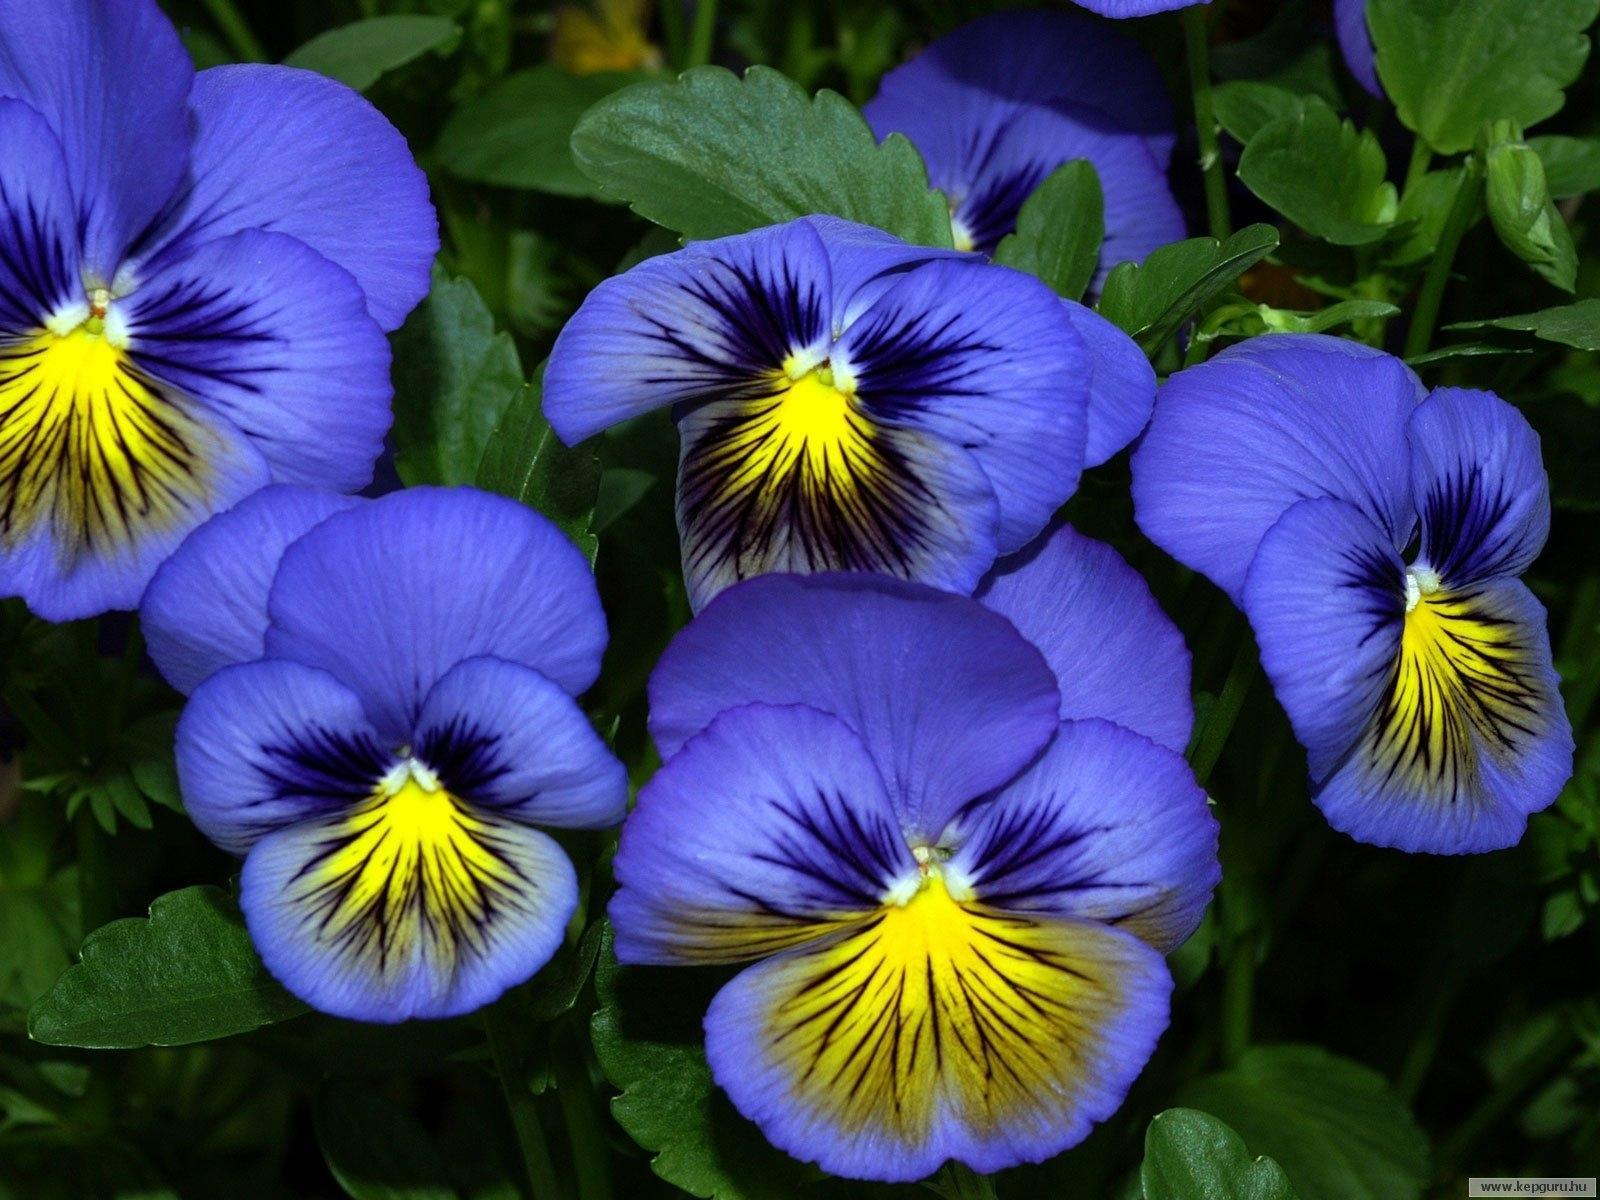 Pansy Flowers Wallpapers - Wallpaper Cave